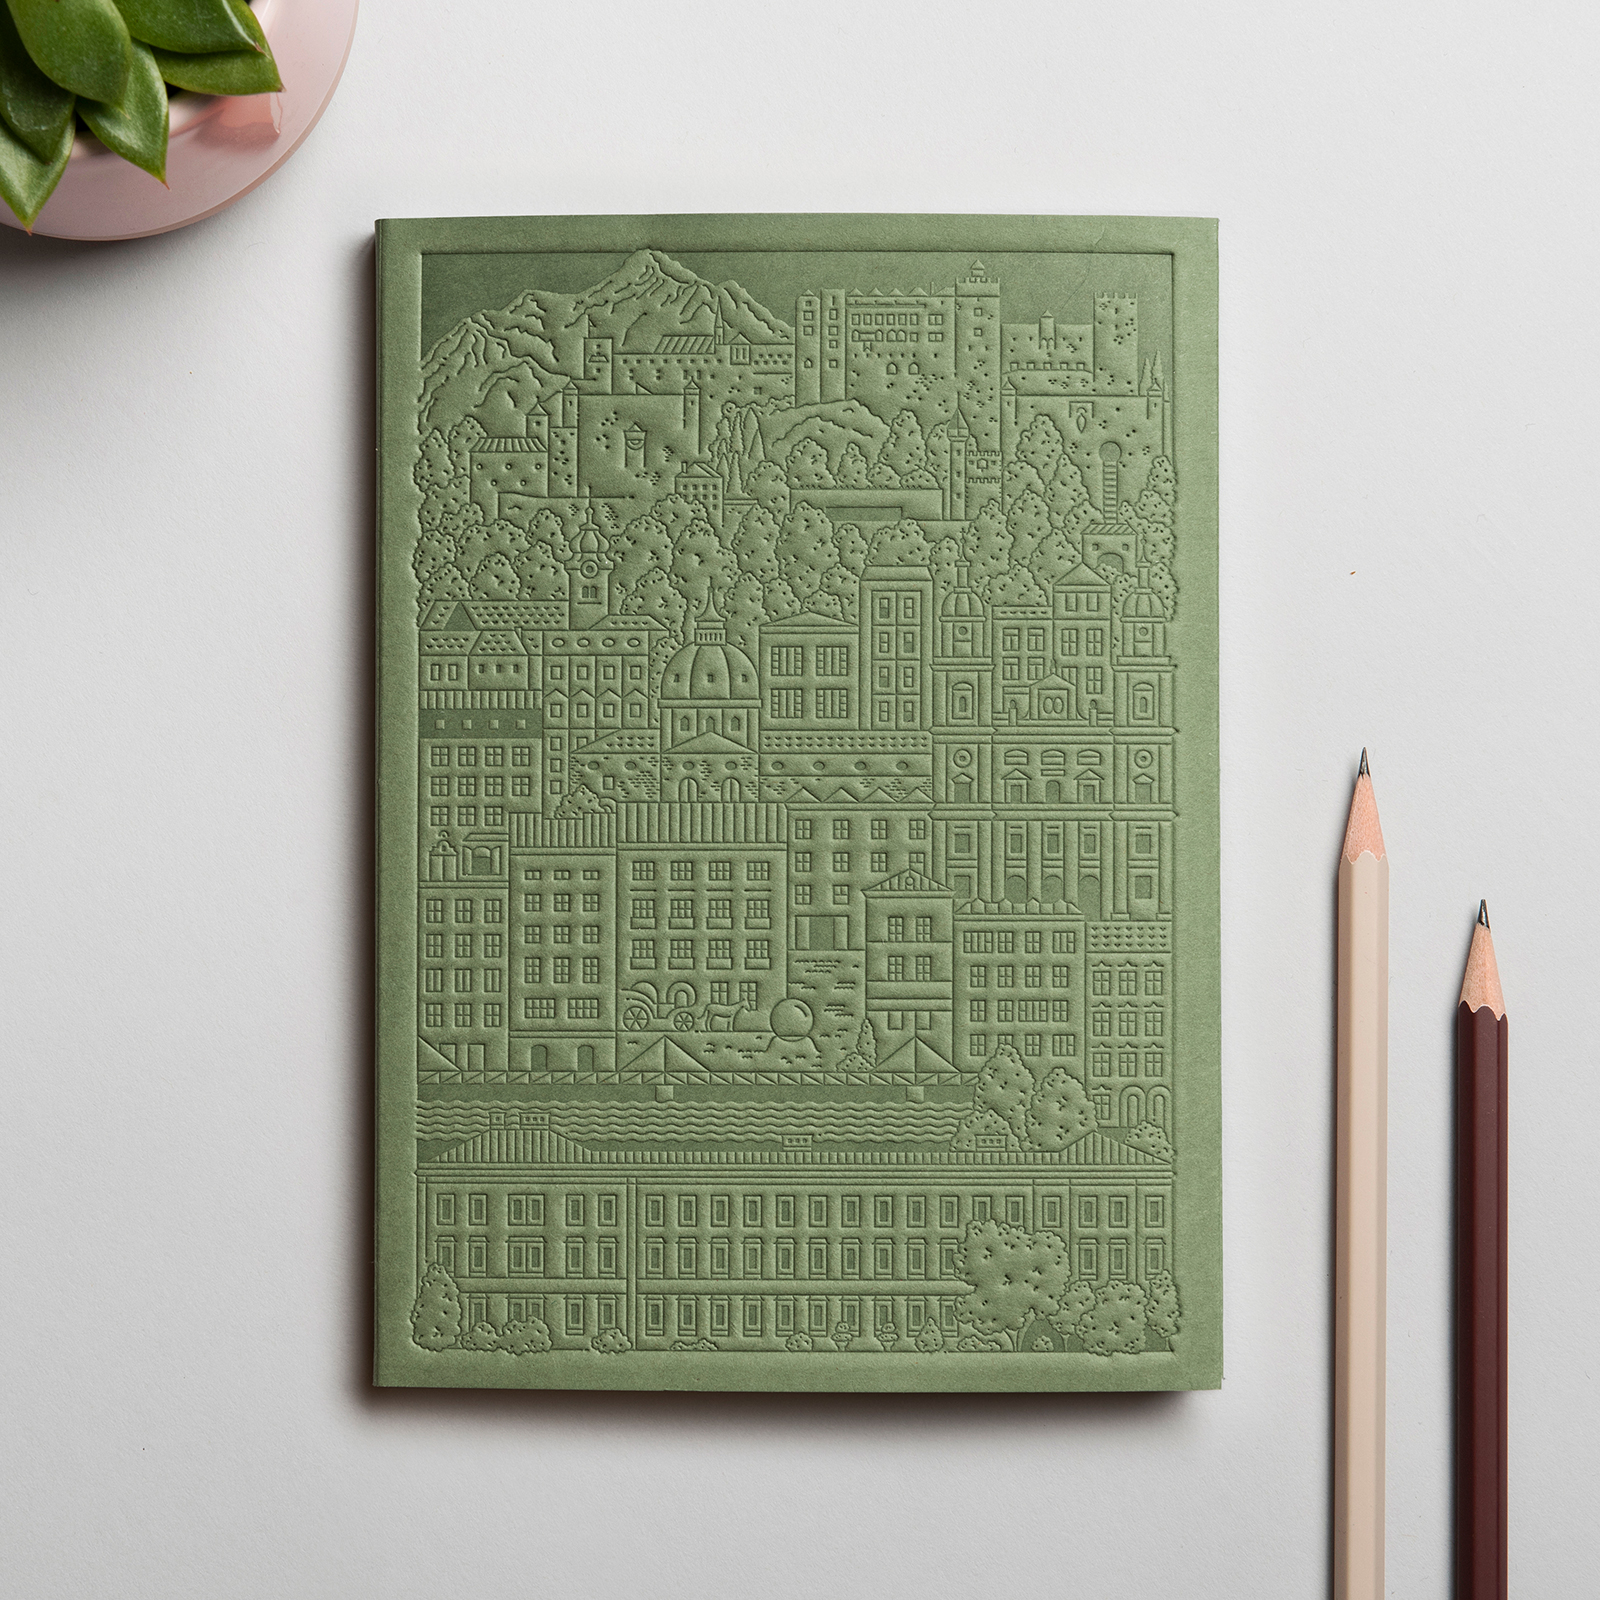 The Salzburg Notebook by The City Works